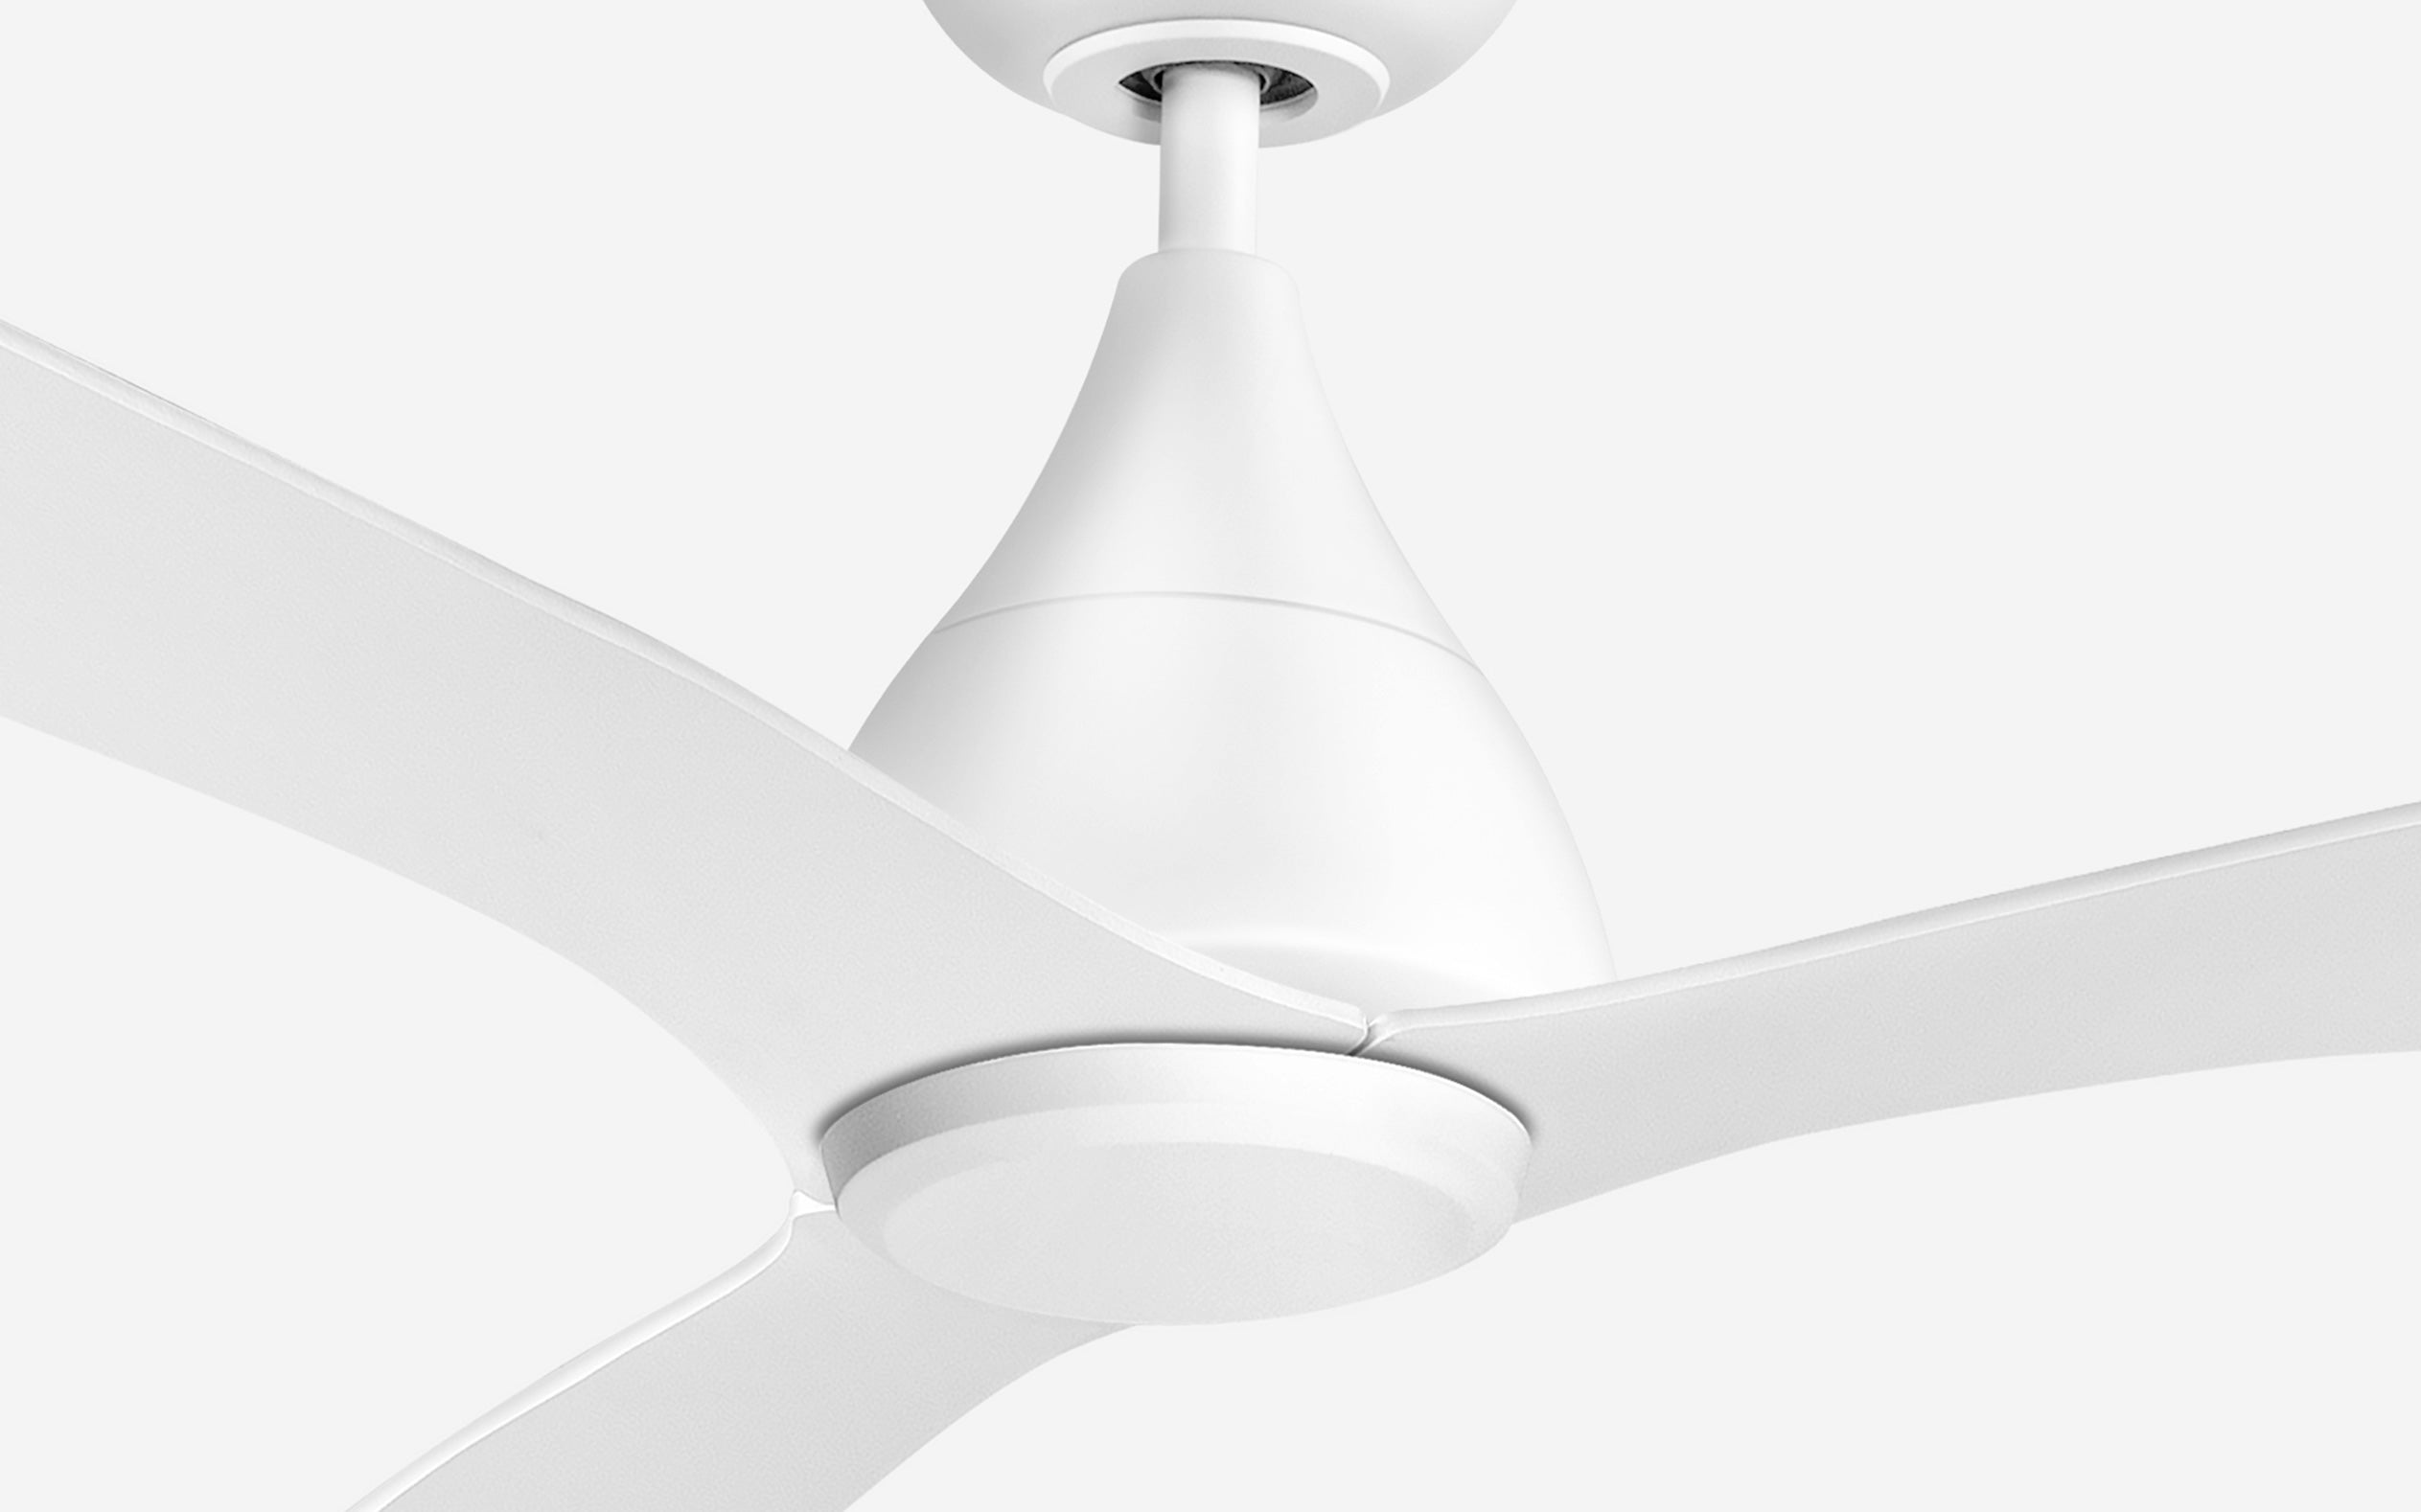 Opal Storm Ceiling Fan - #Body Color_White|Blade Color_White|Blade Size_42"